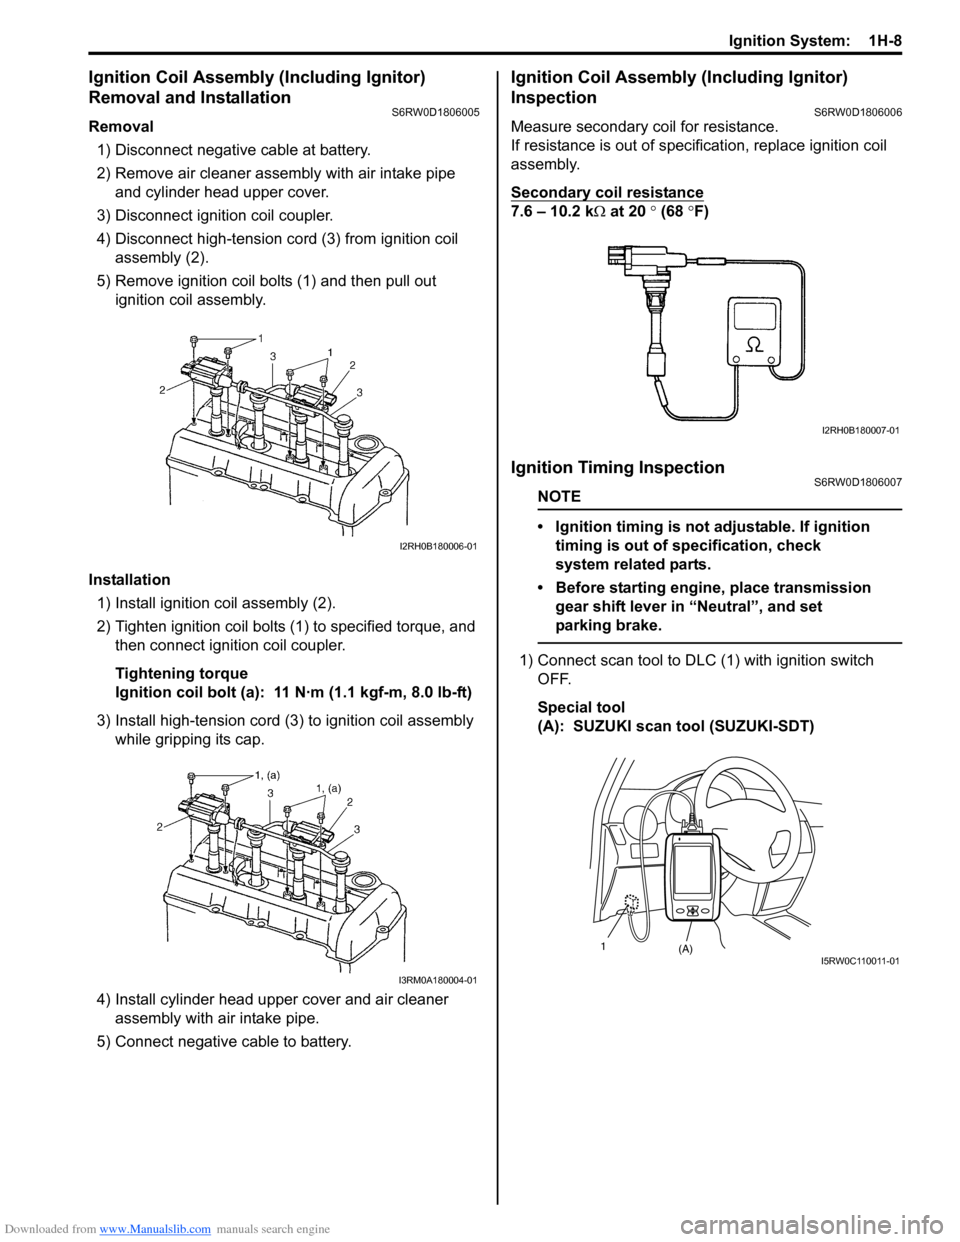 SUZUKI SX4 2006 1.G Service Workshop Manual Downloaded from www.Manualslib.com manuals search engine Ignition System:  1H-8
Ignition Coil Assembly (Including Ignitor) 
Removal and Installation
S6RW0D1806005
Removal
1) Disconnect negative cable 